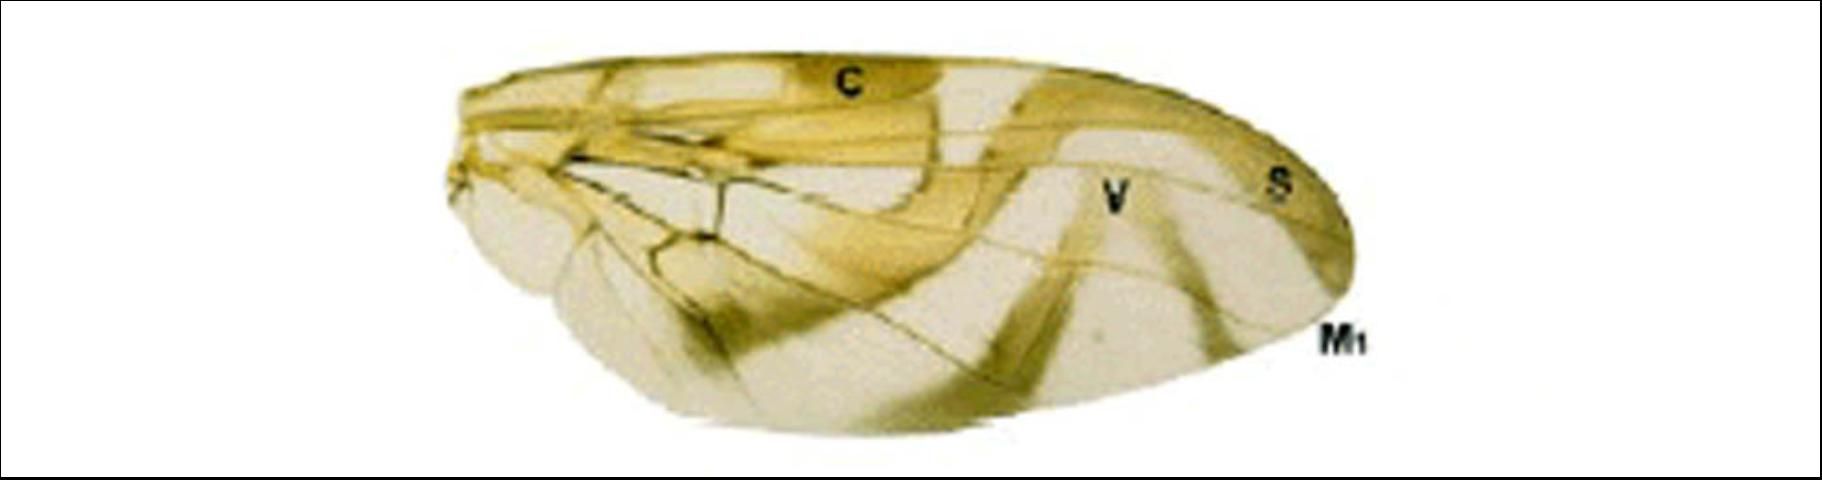 Figure 3. Wing of the Mexican fruit fly, A. ludens.